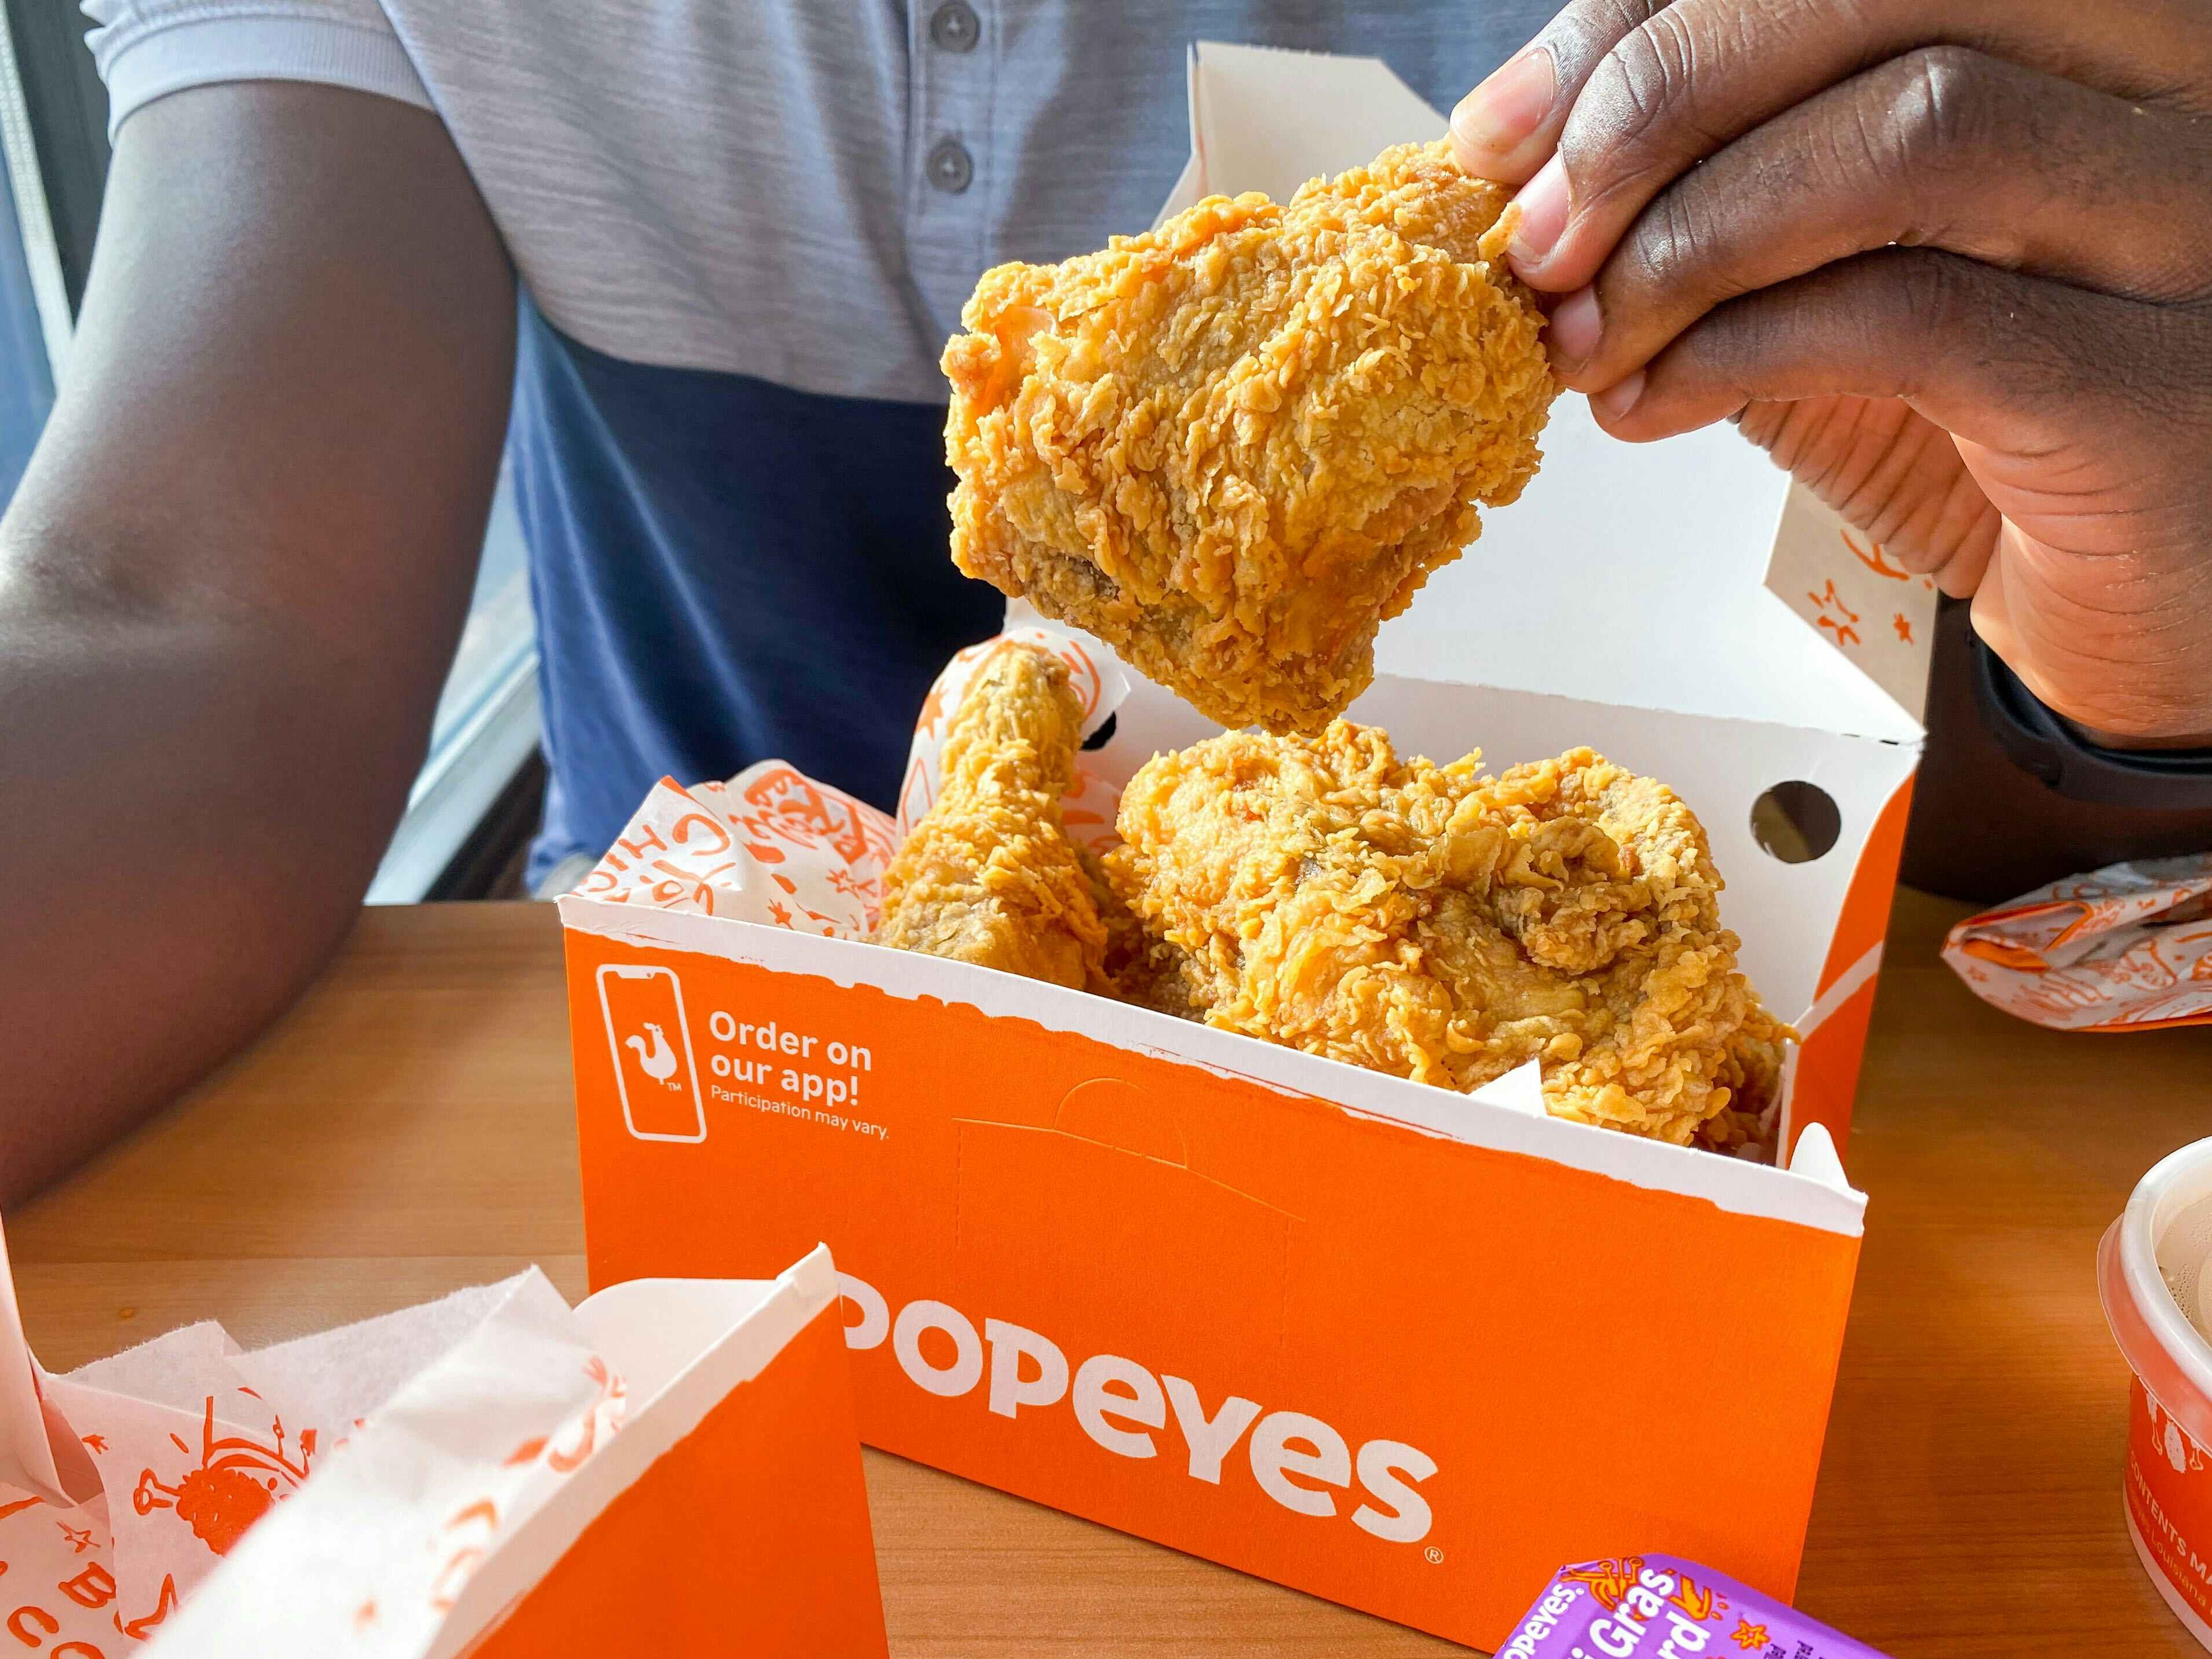 A man taking a piece of chicken out of a box of Popeyes chicken.